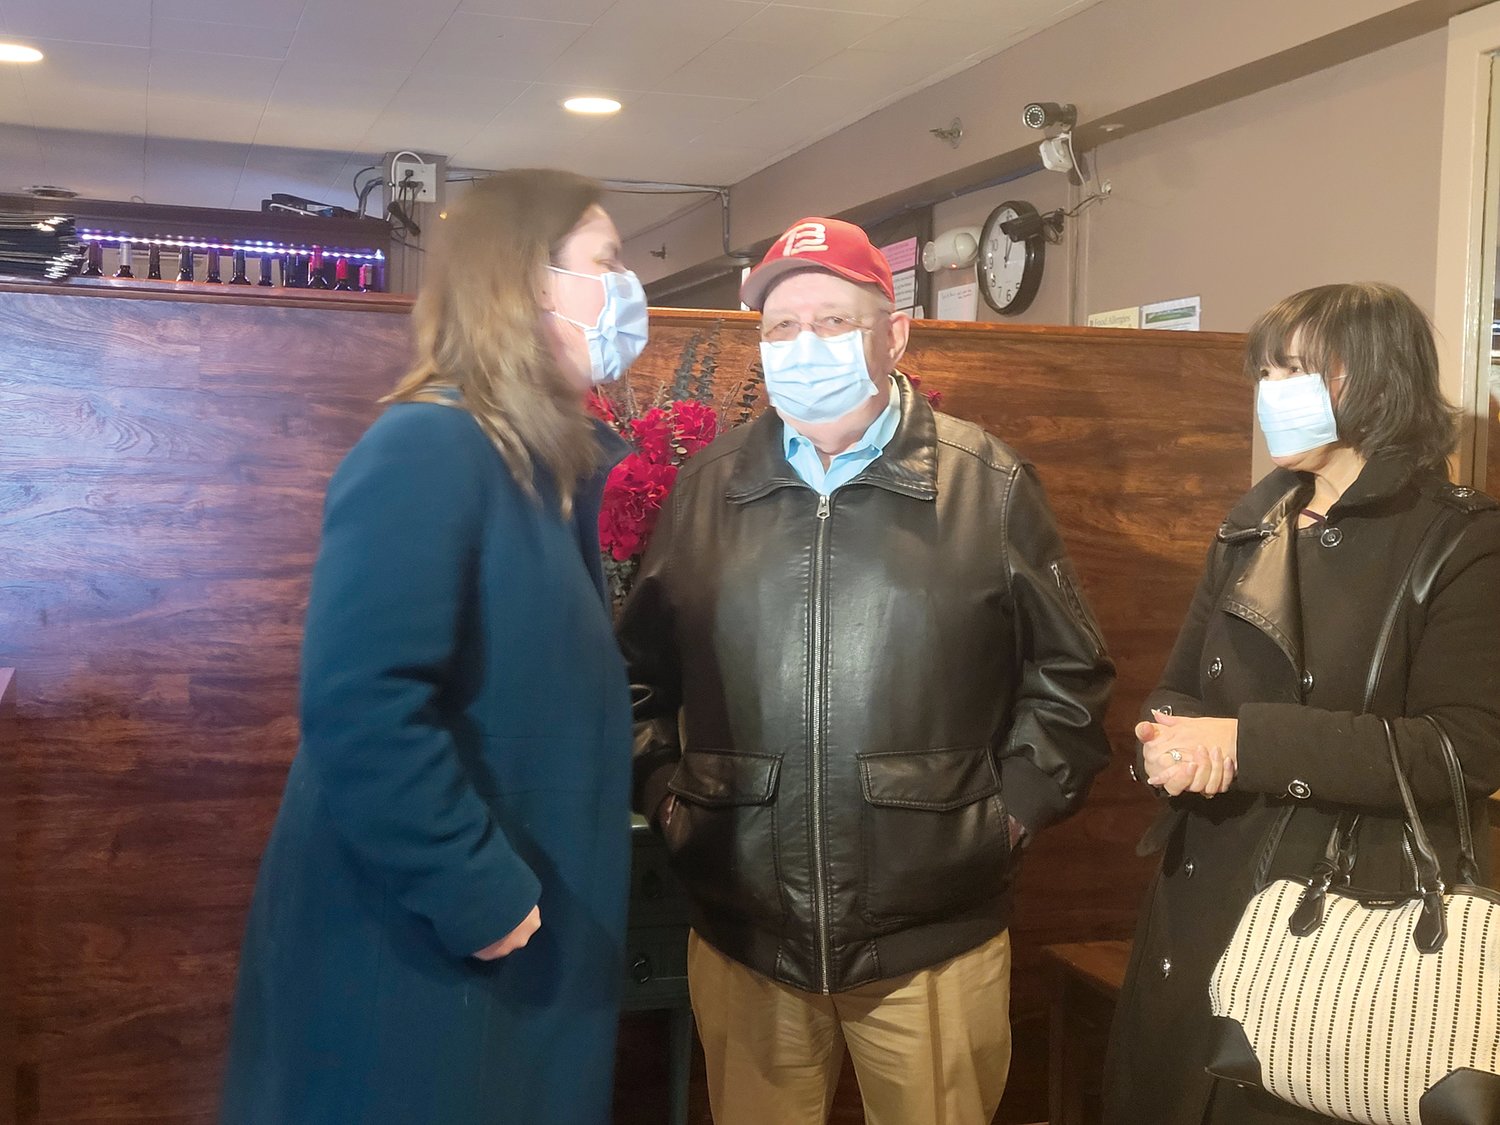 PLEASE WAIT TO BE VETTED: Joy Fox mingled with patrons waiting for tables in the Atwood Grill lobby. Fox made campaign stops throughout Rhode Island Tuesday as she pitches her run for the state’s second Congressional district seat.